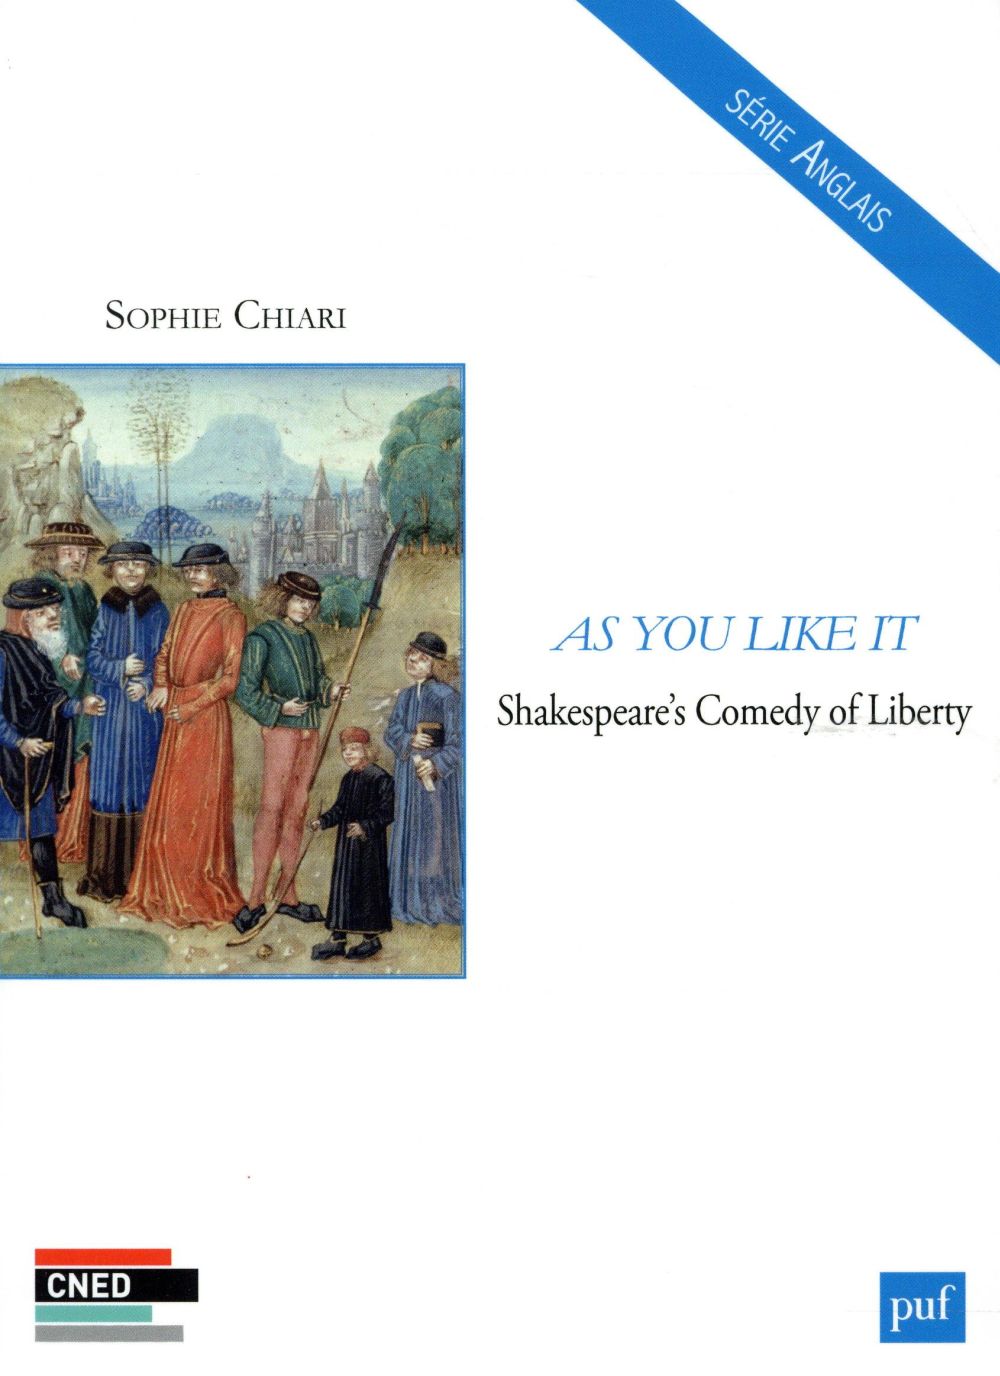 AS YOU LIKE IT - SHAKESPEARE'S COMEDY OF LIBERTY